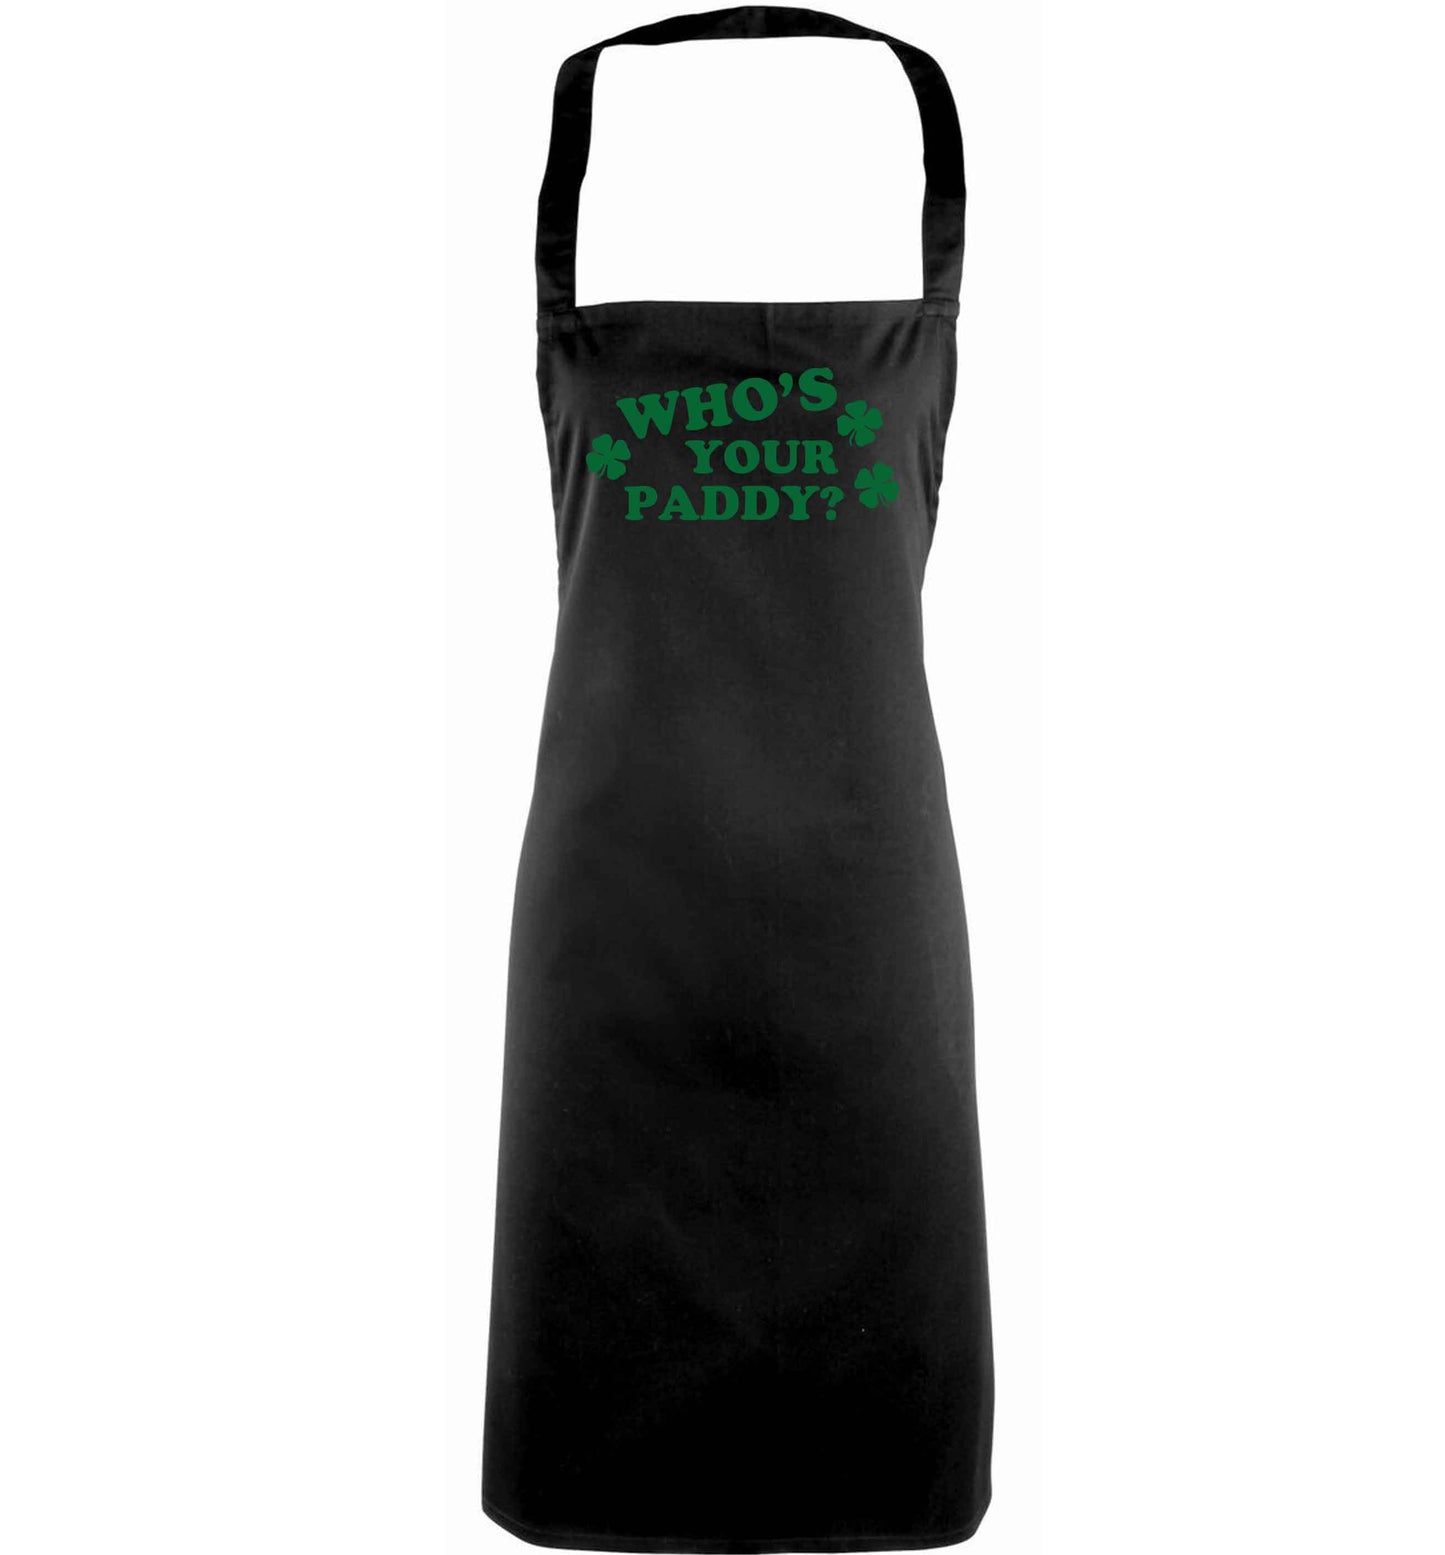 Who's your paddy? adults black apron